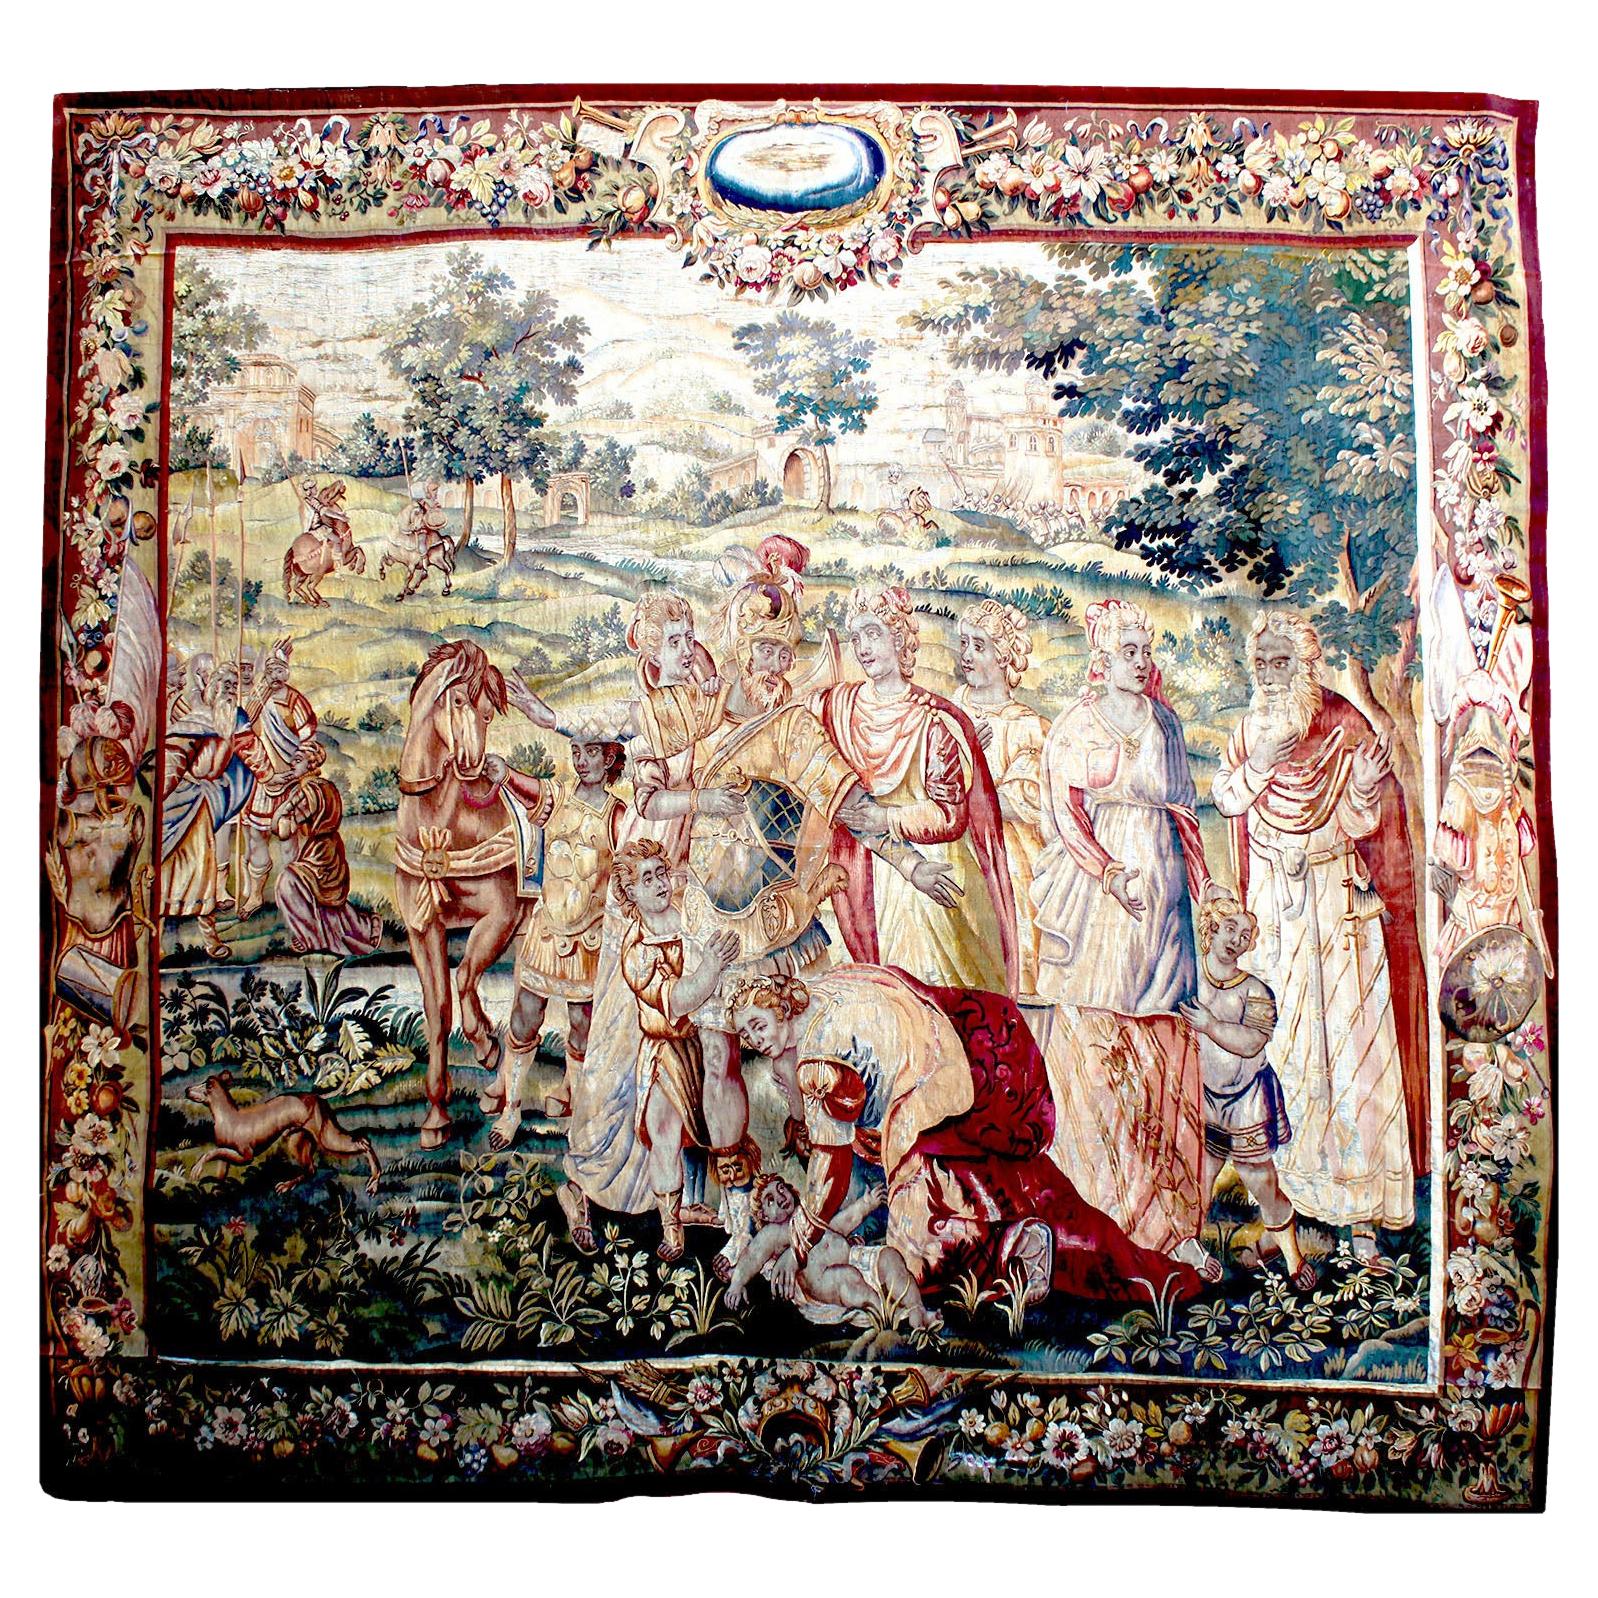 Flemish 17th-18th Century Baroque Historical Tapestry Fragment "A Royal Family" For Sale